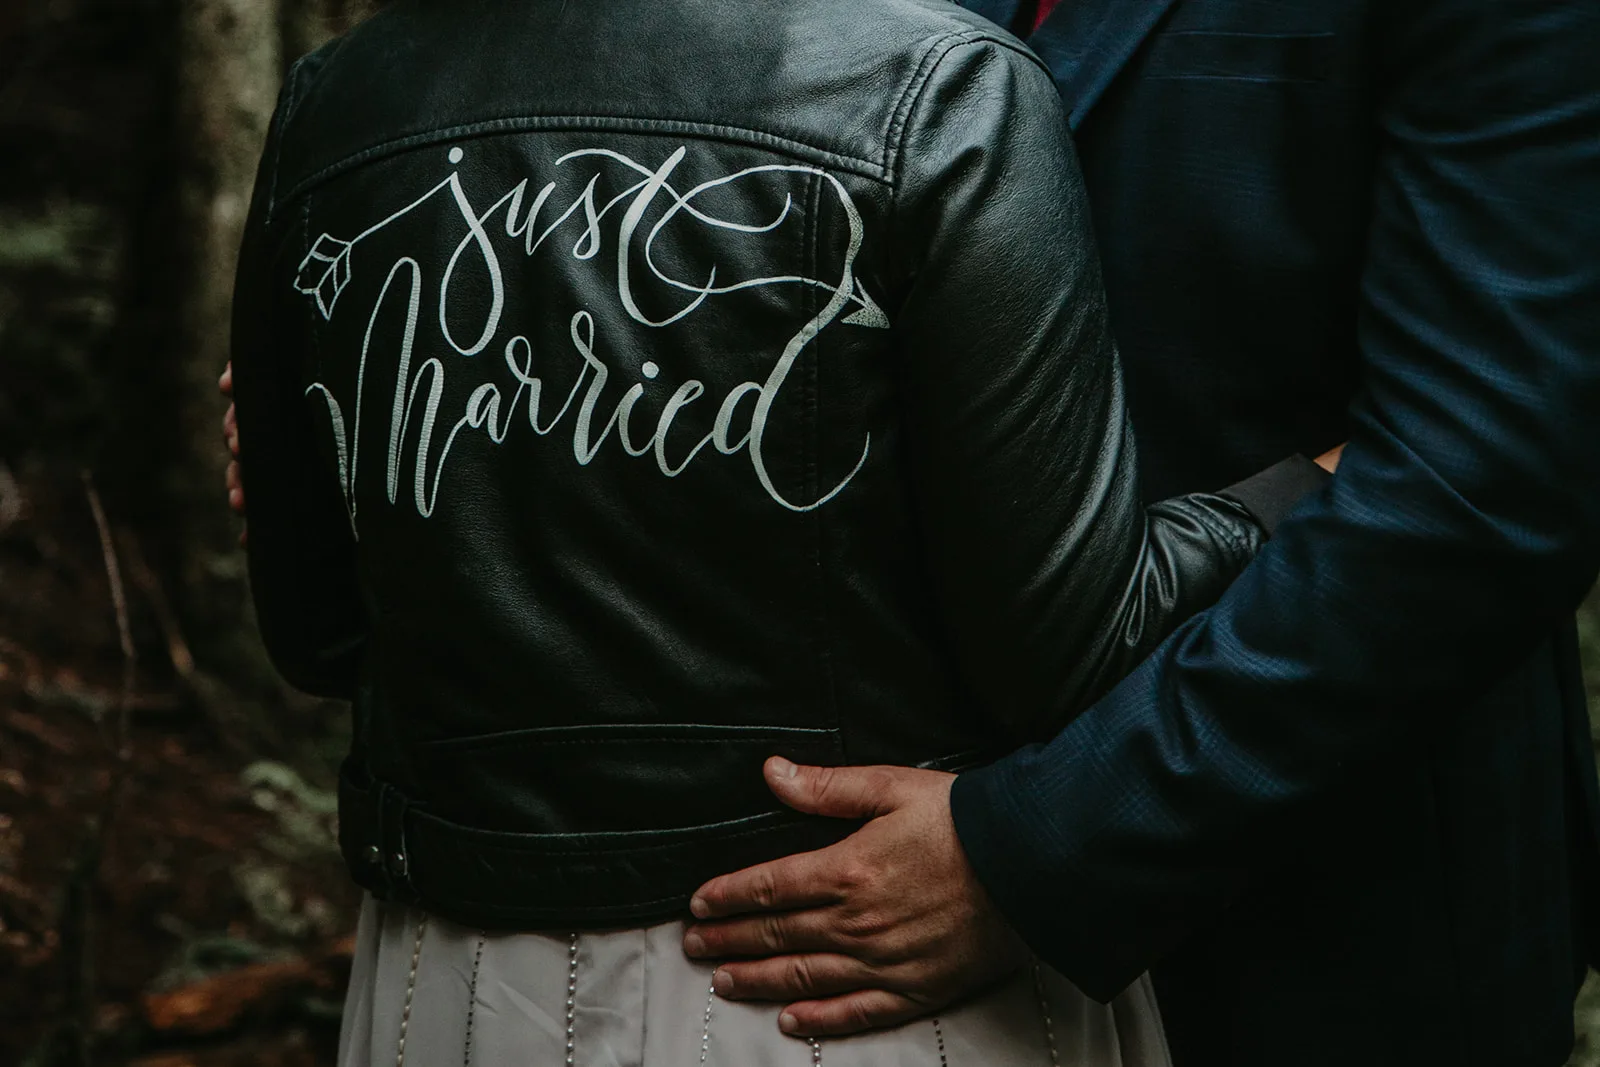 Newlywed couple, bride has her back to the camera showing off a jacket that says "just married"